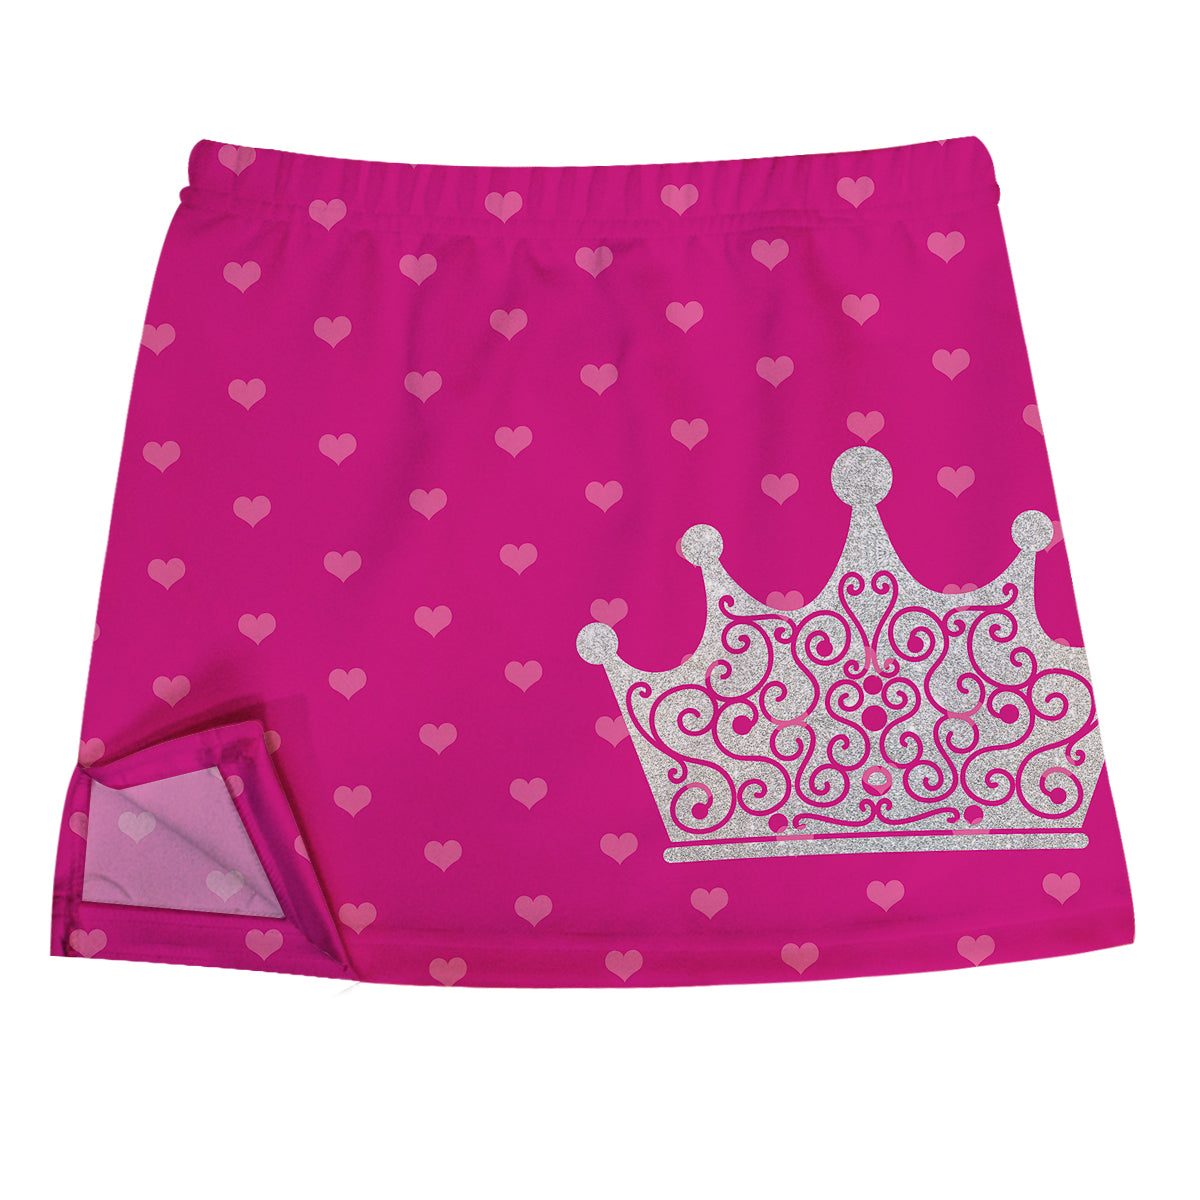 Glitter Crown and Hearts Hot Pink Skirt With Side Vents - Wimziy&Co.